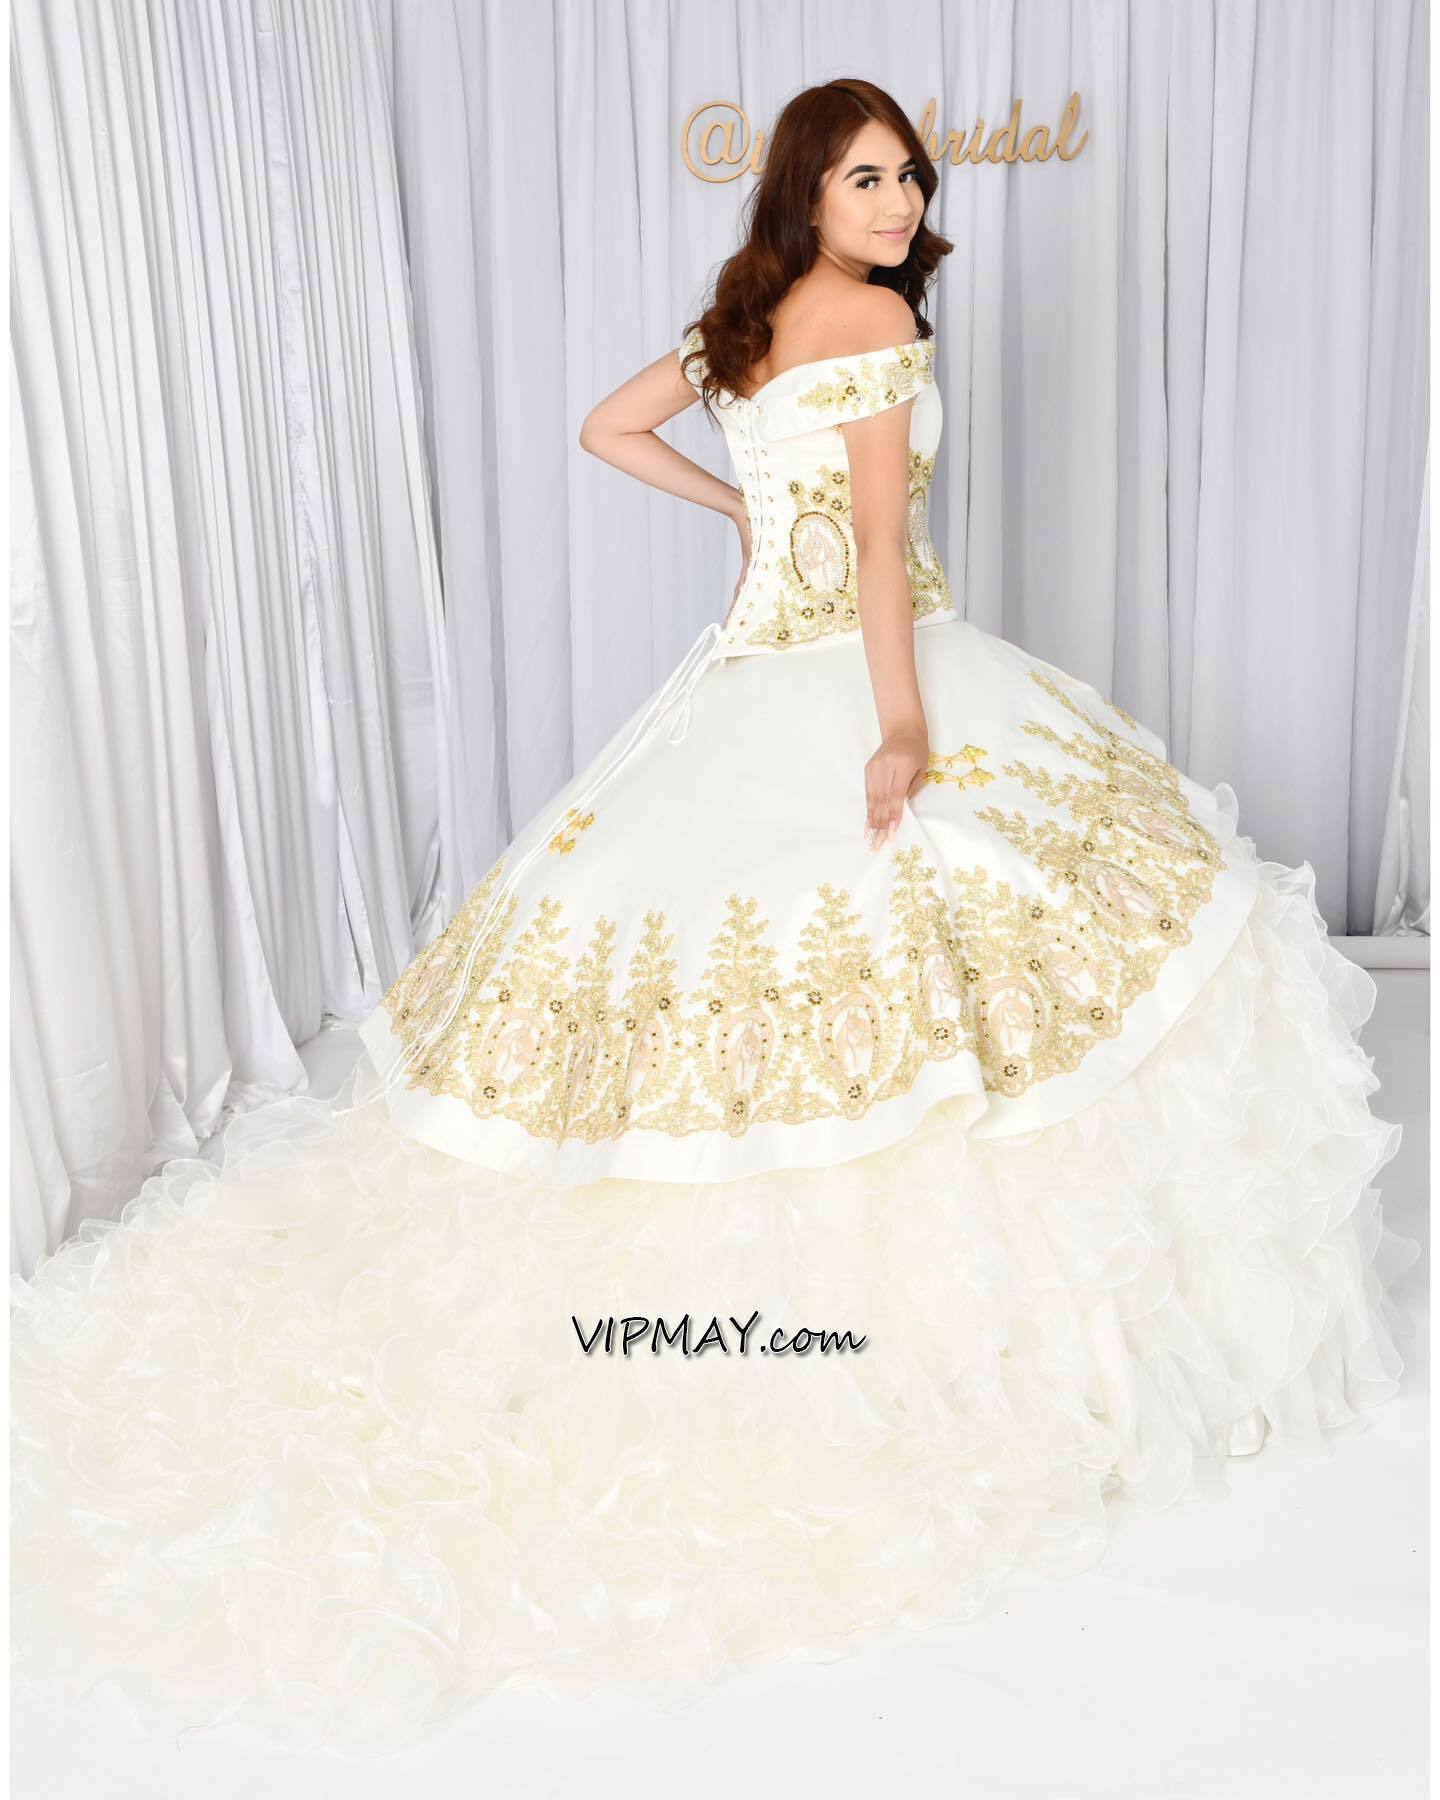 online cheap quinceanera dress,where to buy cheap quinceanera dress,cheap beautiful quinceanera dress,white and gold quinceanera dress,traditional mexican quinceanera dress,white quinceanera dress,quinceanera dress with horses,sweet sixteen dress with ruffles,quinceanera dress with ruffles,custom make your quinceanera dress,